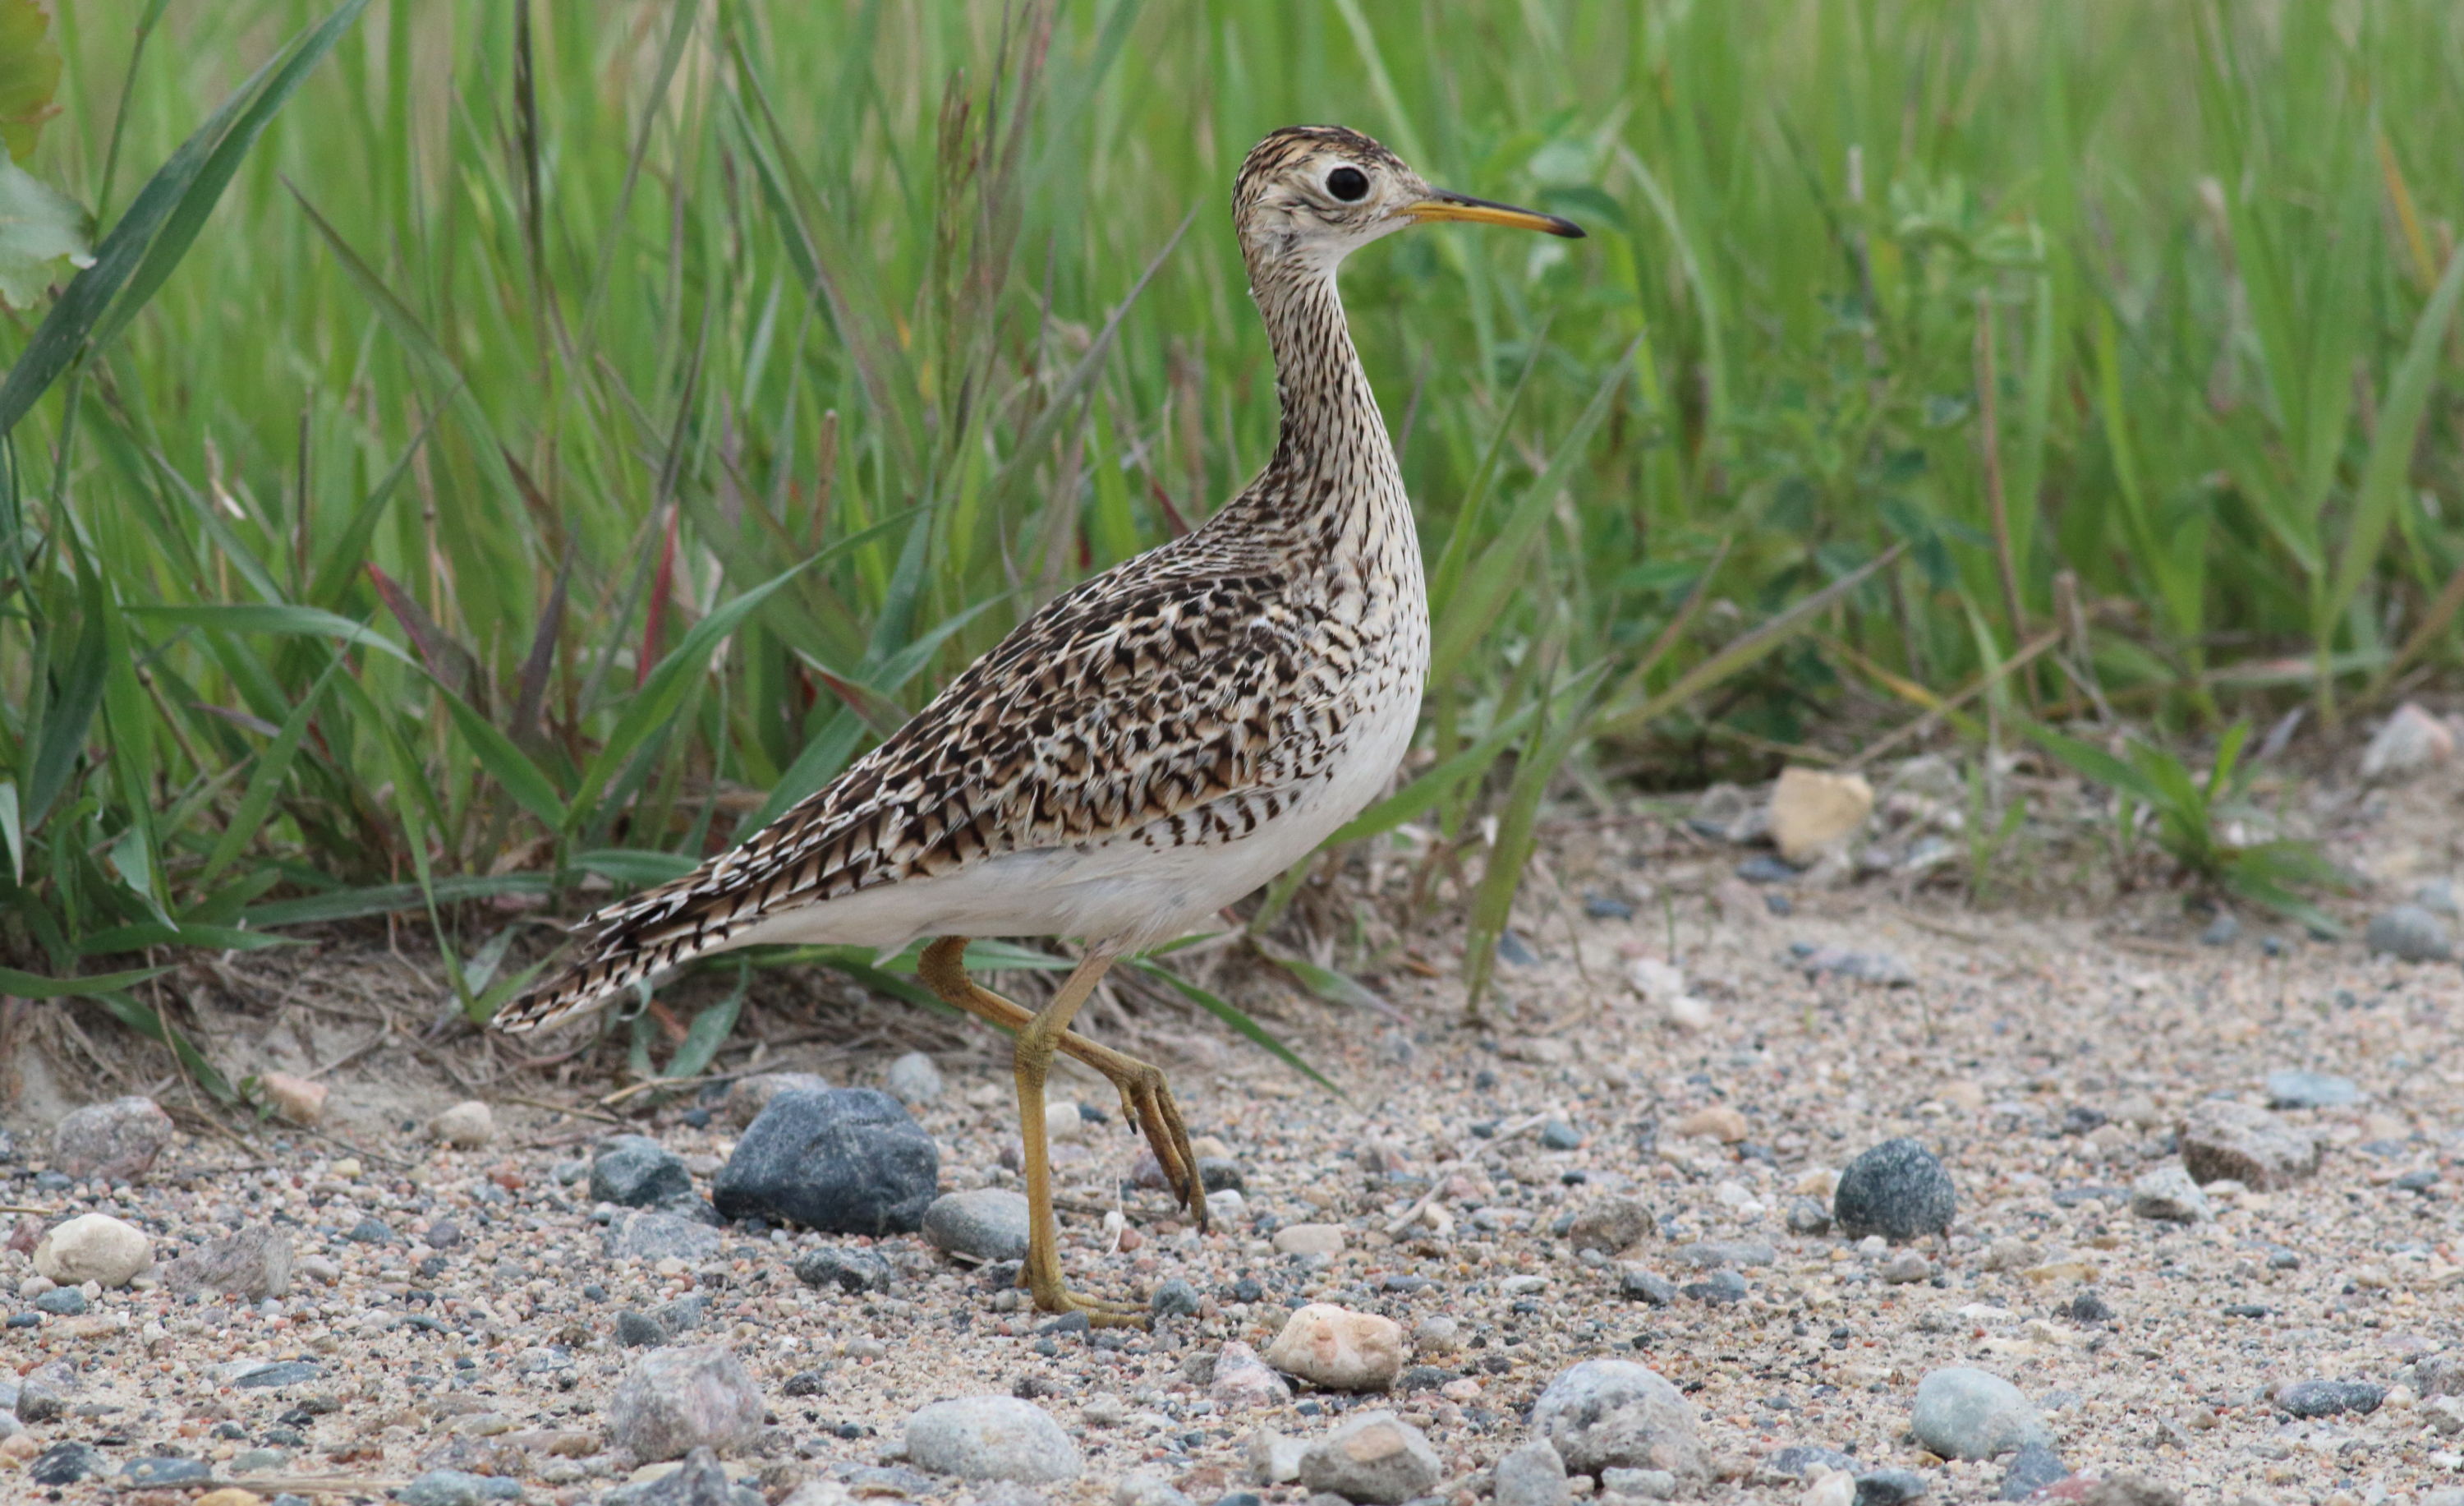 Upland Sandpiper at Felton Prairie, a carefully managed remnant prairie in northern Minnesota. Photo by Bruce Beehler